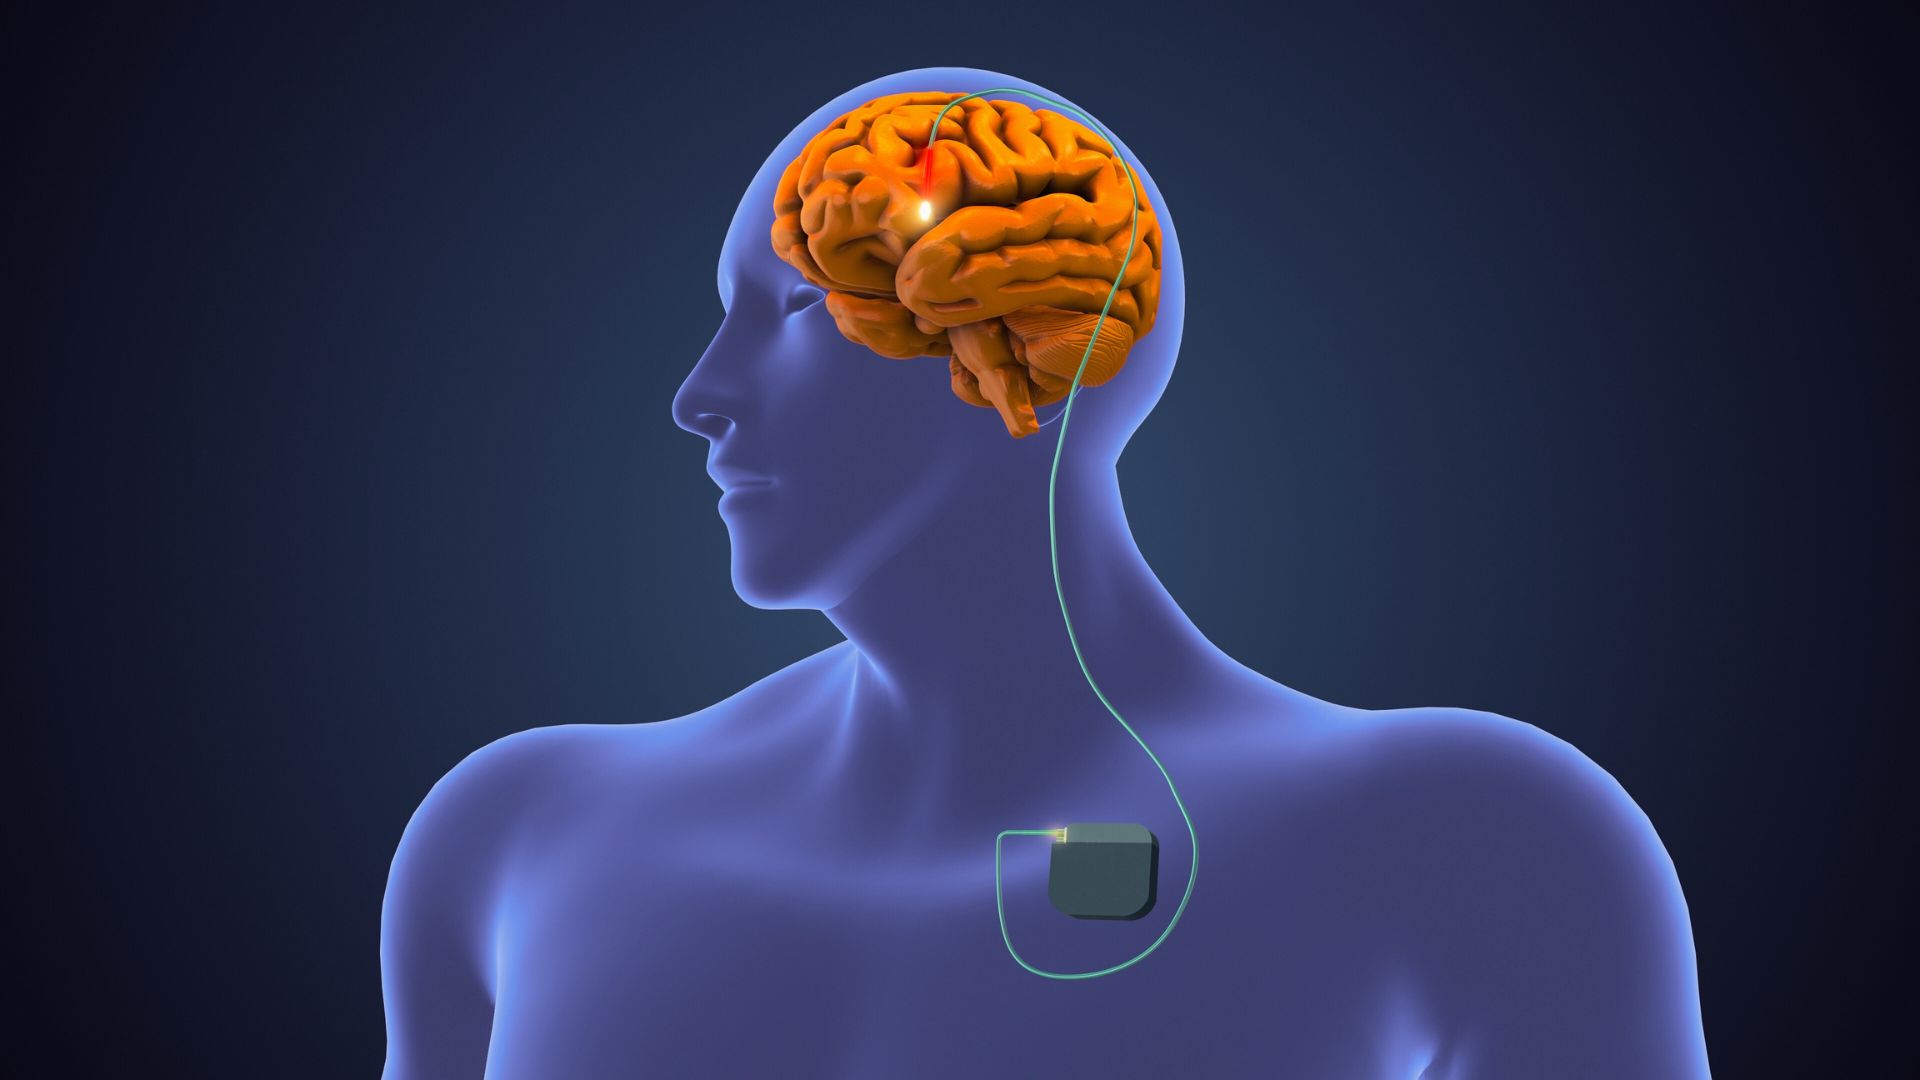 Illustration of human brain with a wire (referred to as a lead) inserted into an area deep in the brain for therapeutic reasons. Deep brain stimulation for Parkinson's disease.